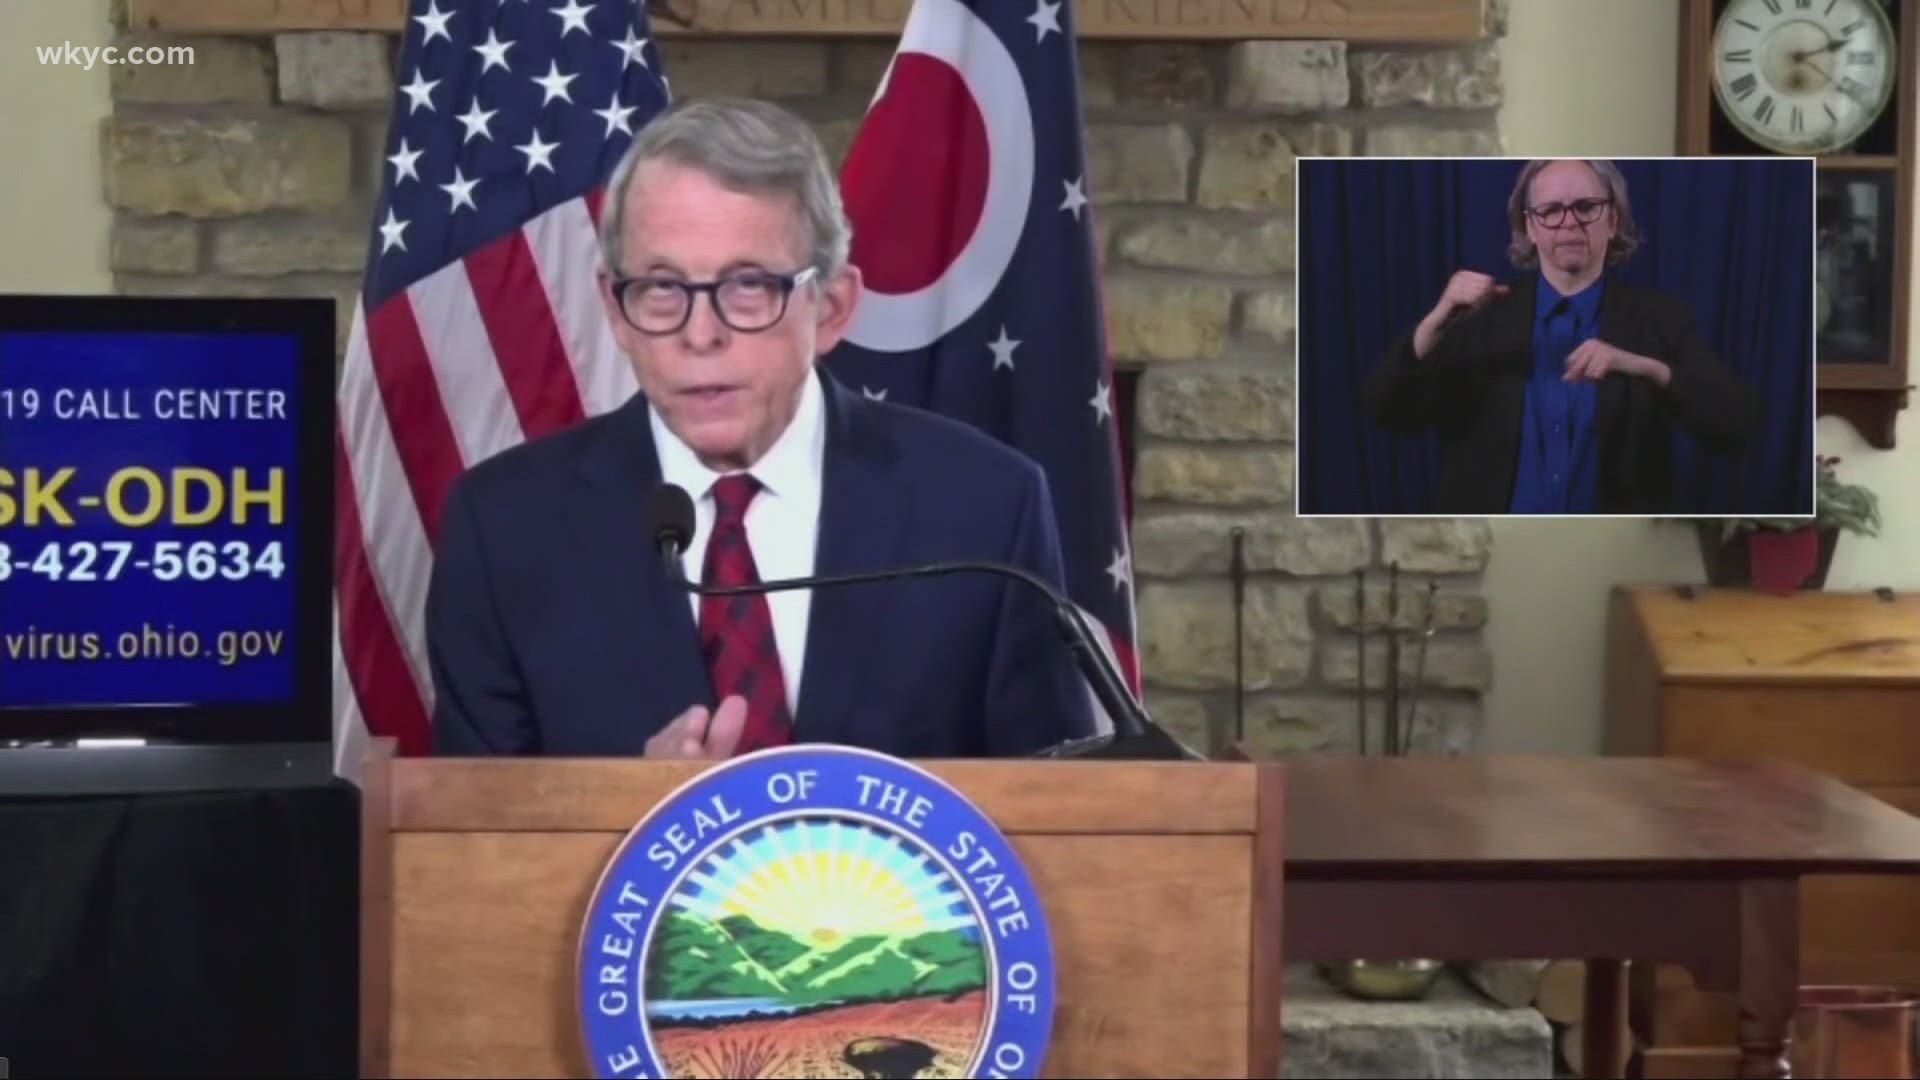 DeWine announced on Thursday that Pfizer and Moderna will increase its COVID-19 vaccine shipments to the state. Laura Caso reports.